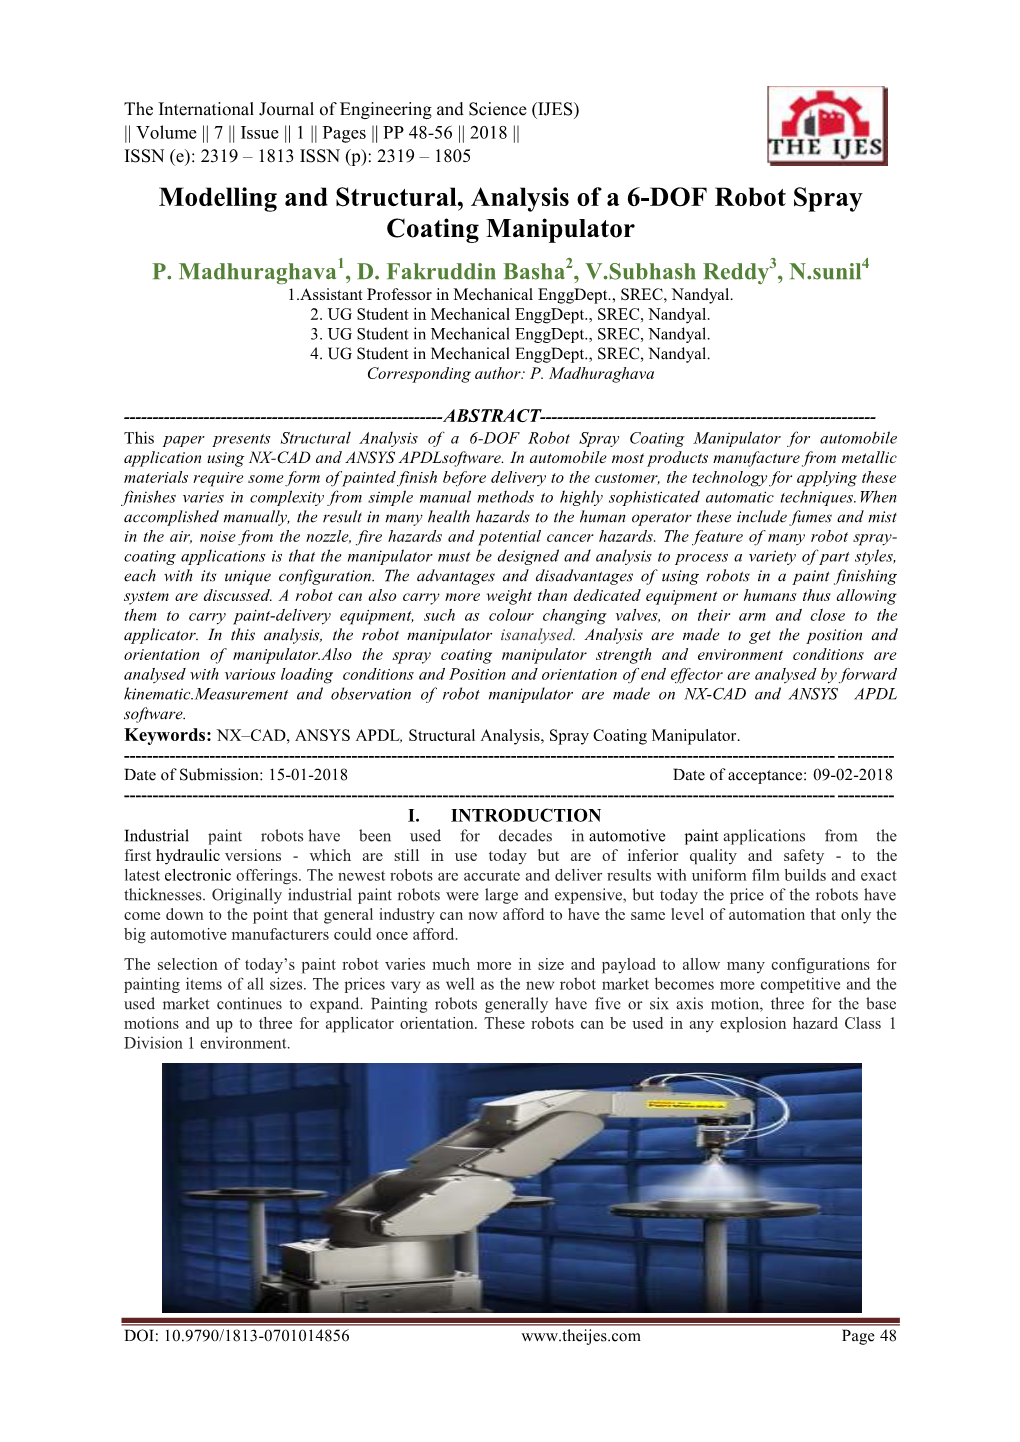 Modelling and Structural, Analysis of a 6-DOF Robot Spray Coating Manipulator P